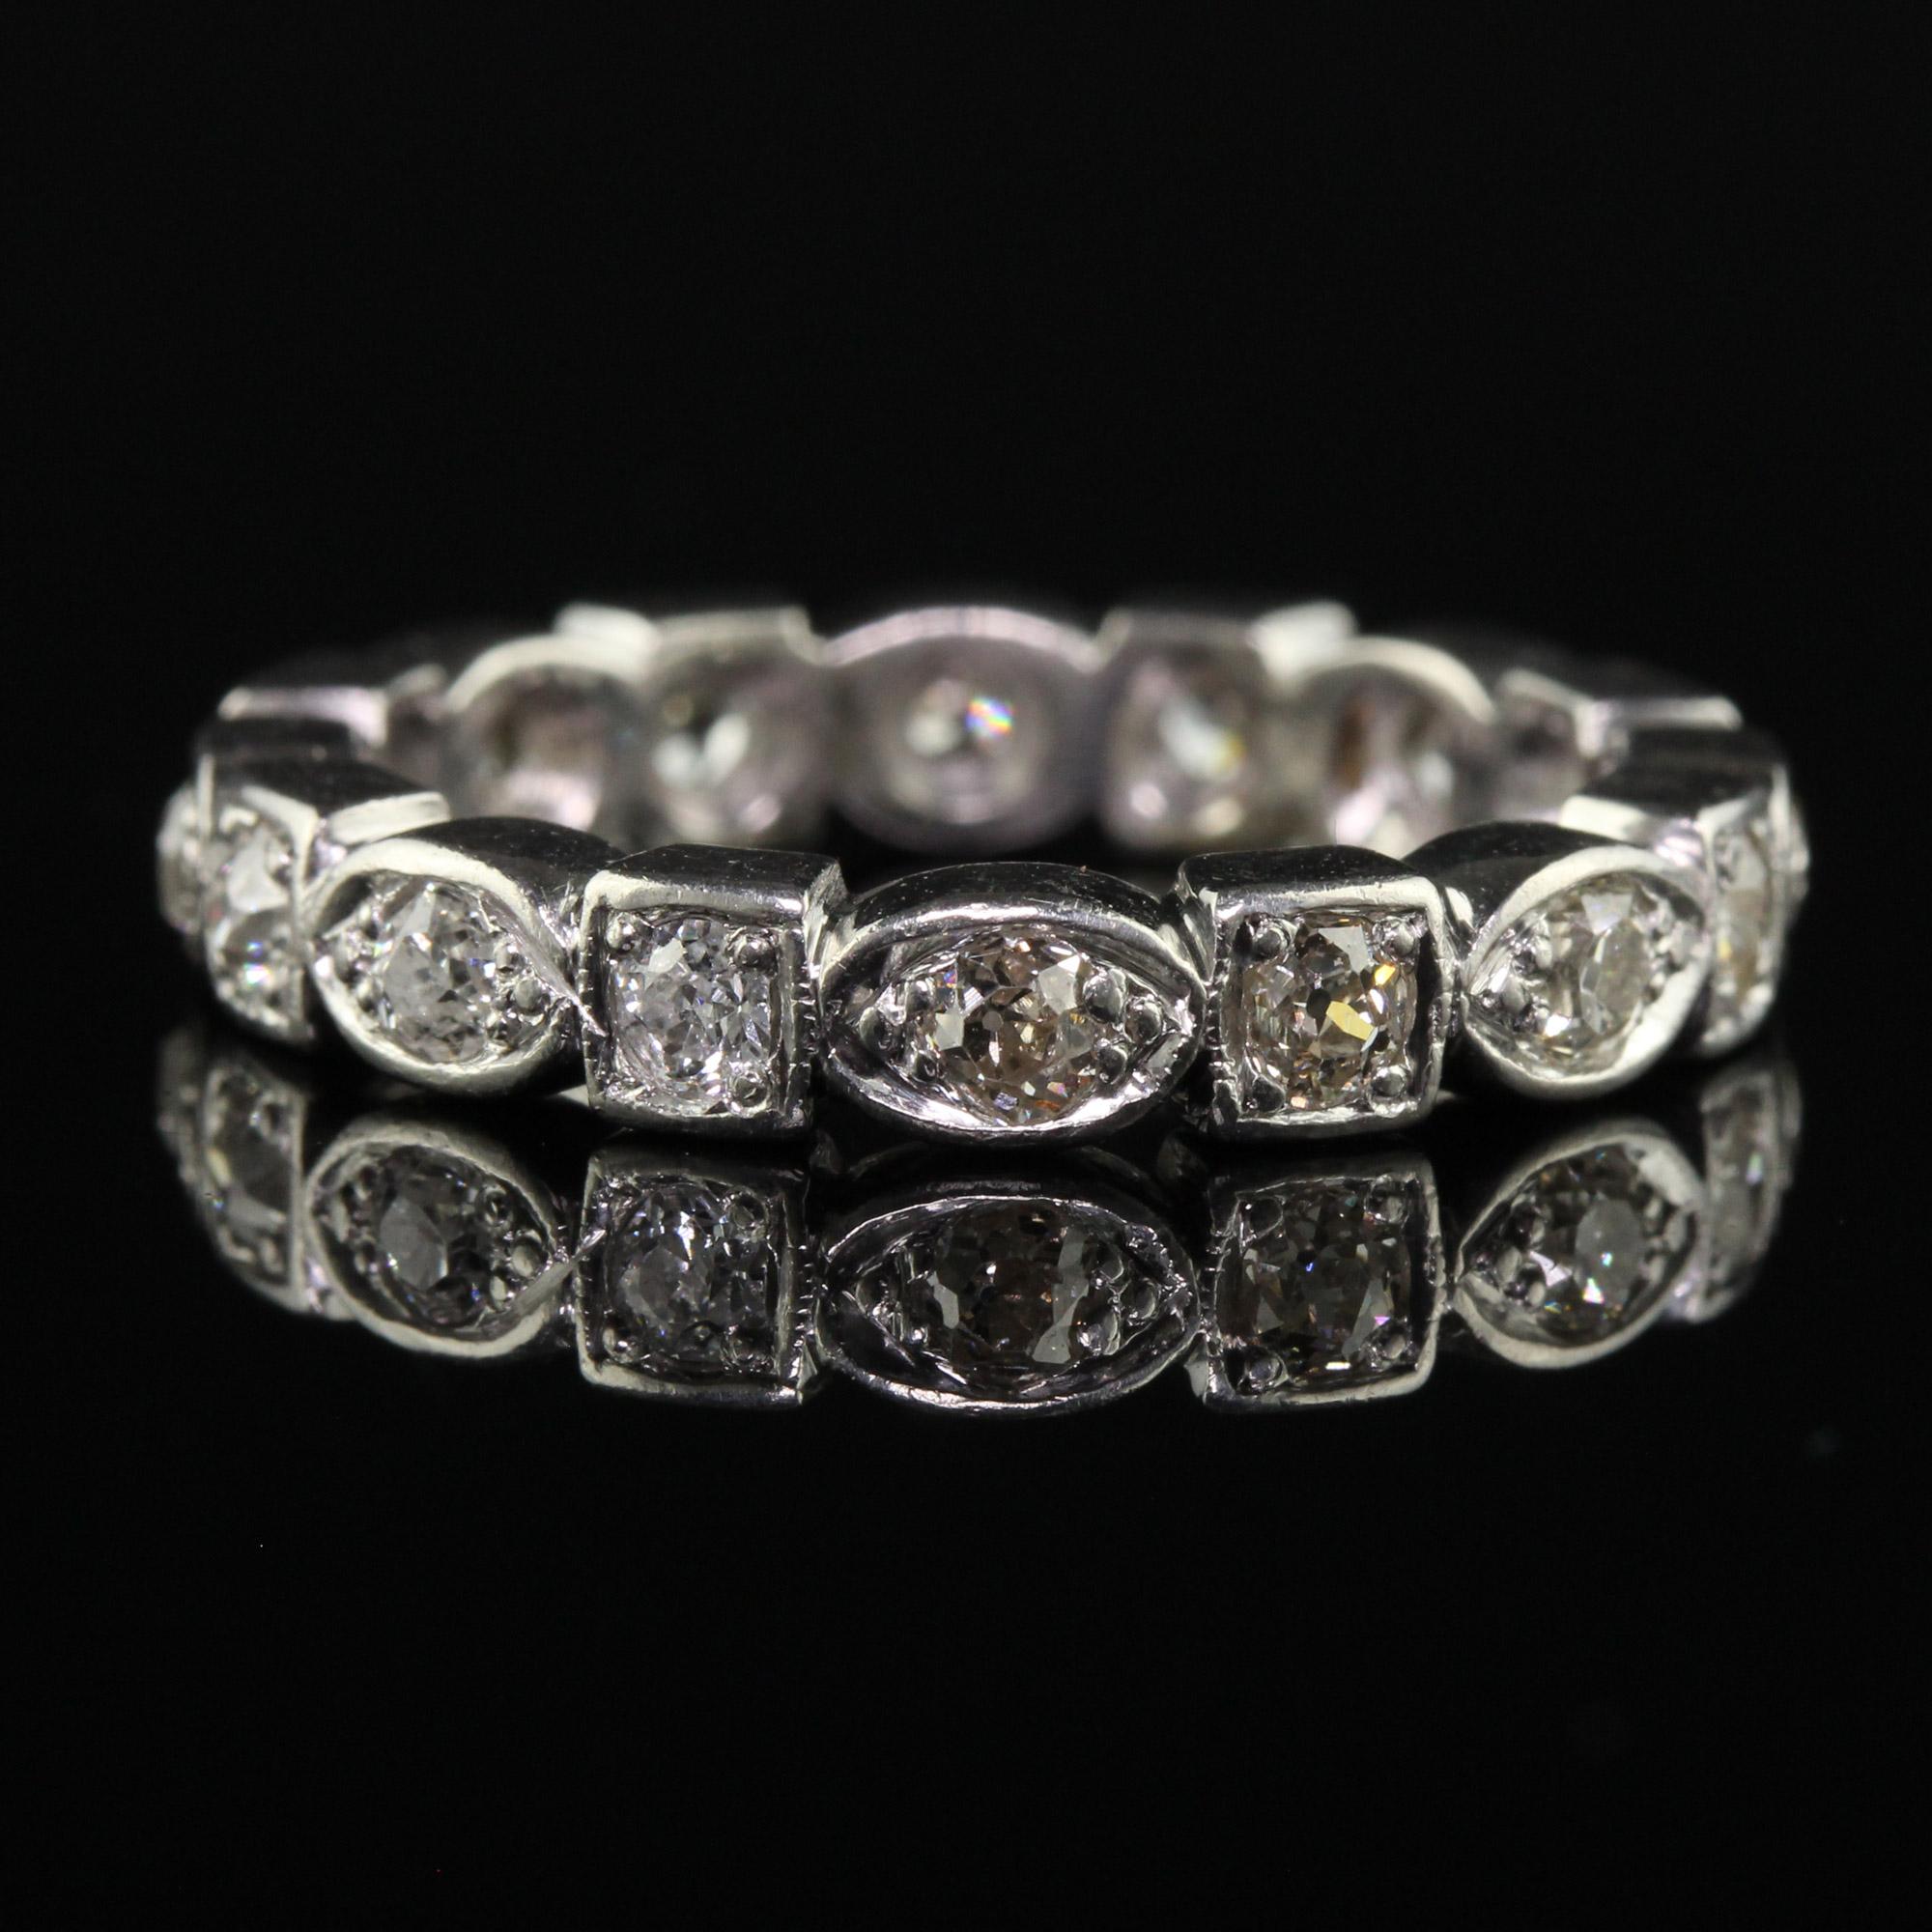 Antique Art Deco Platinum Old Mine Diamond Geometric Eternity Band - Size 6 1/2 In Good Condition For Sale In Great Neck, NY